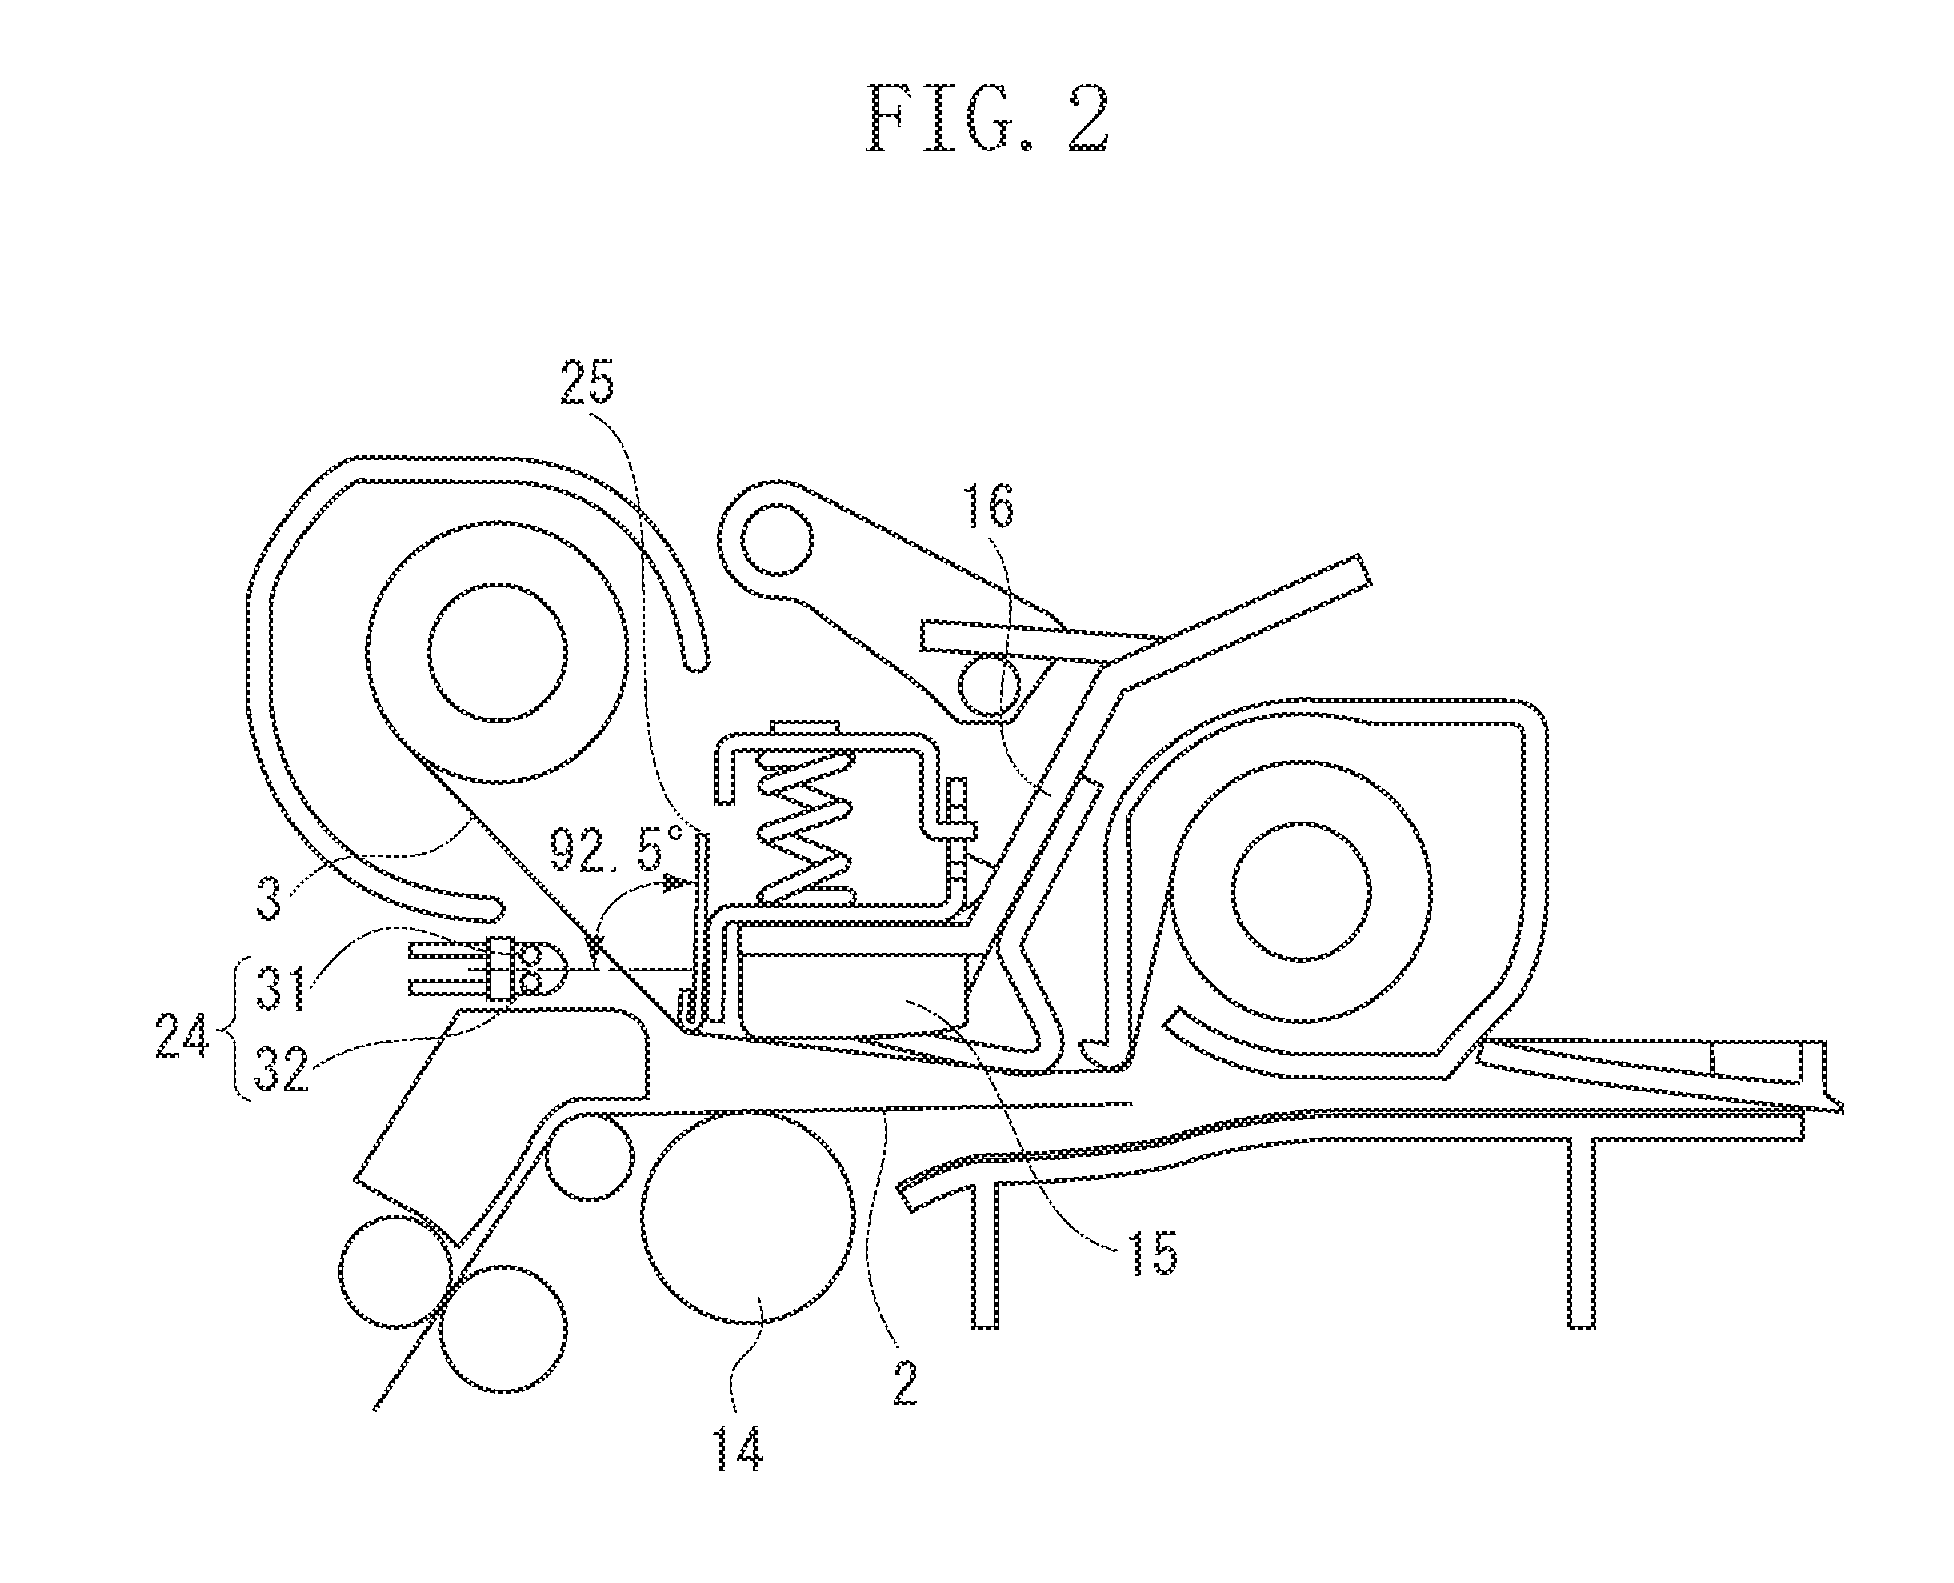 Printing apparatus and method for controlling printing apparatus